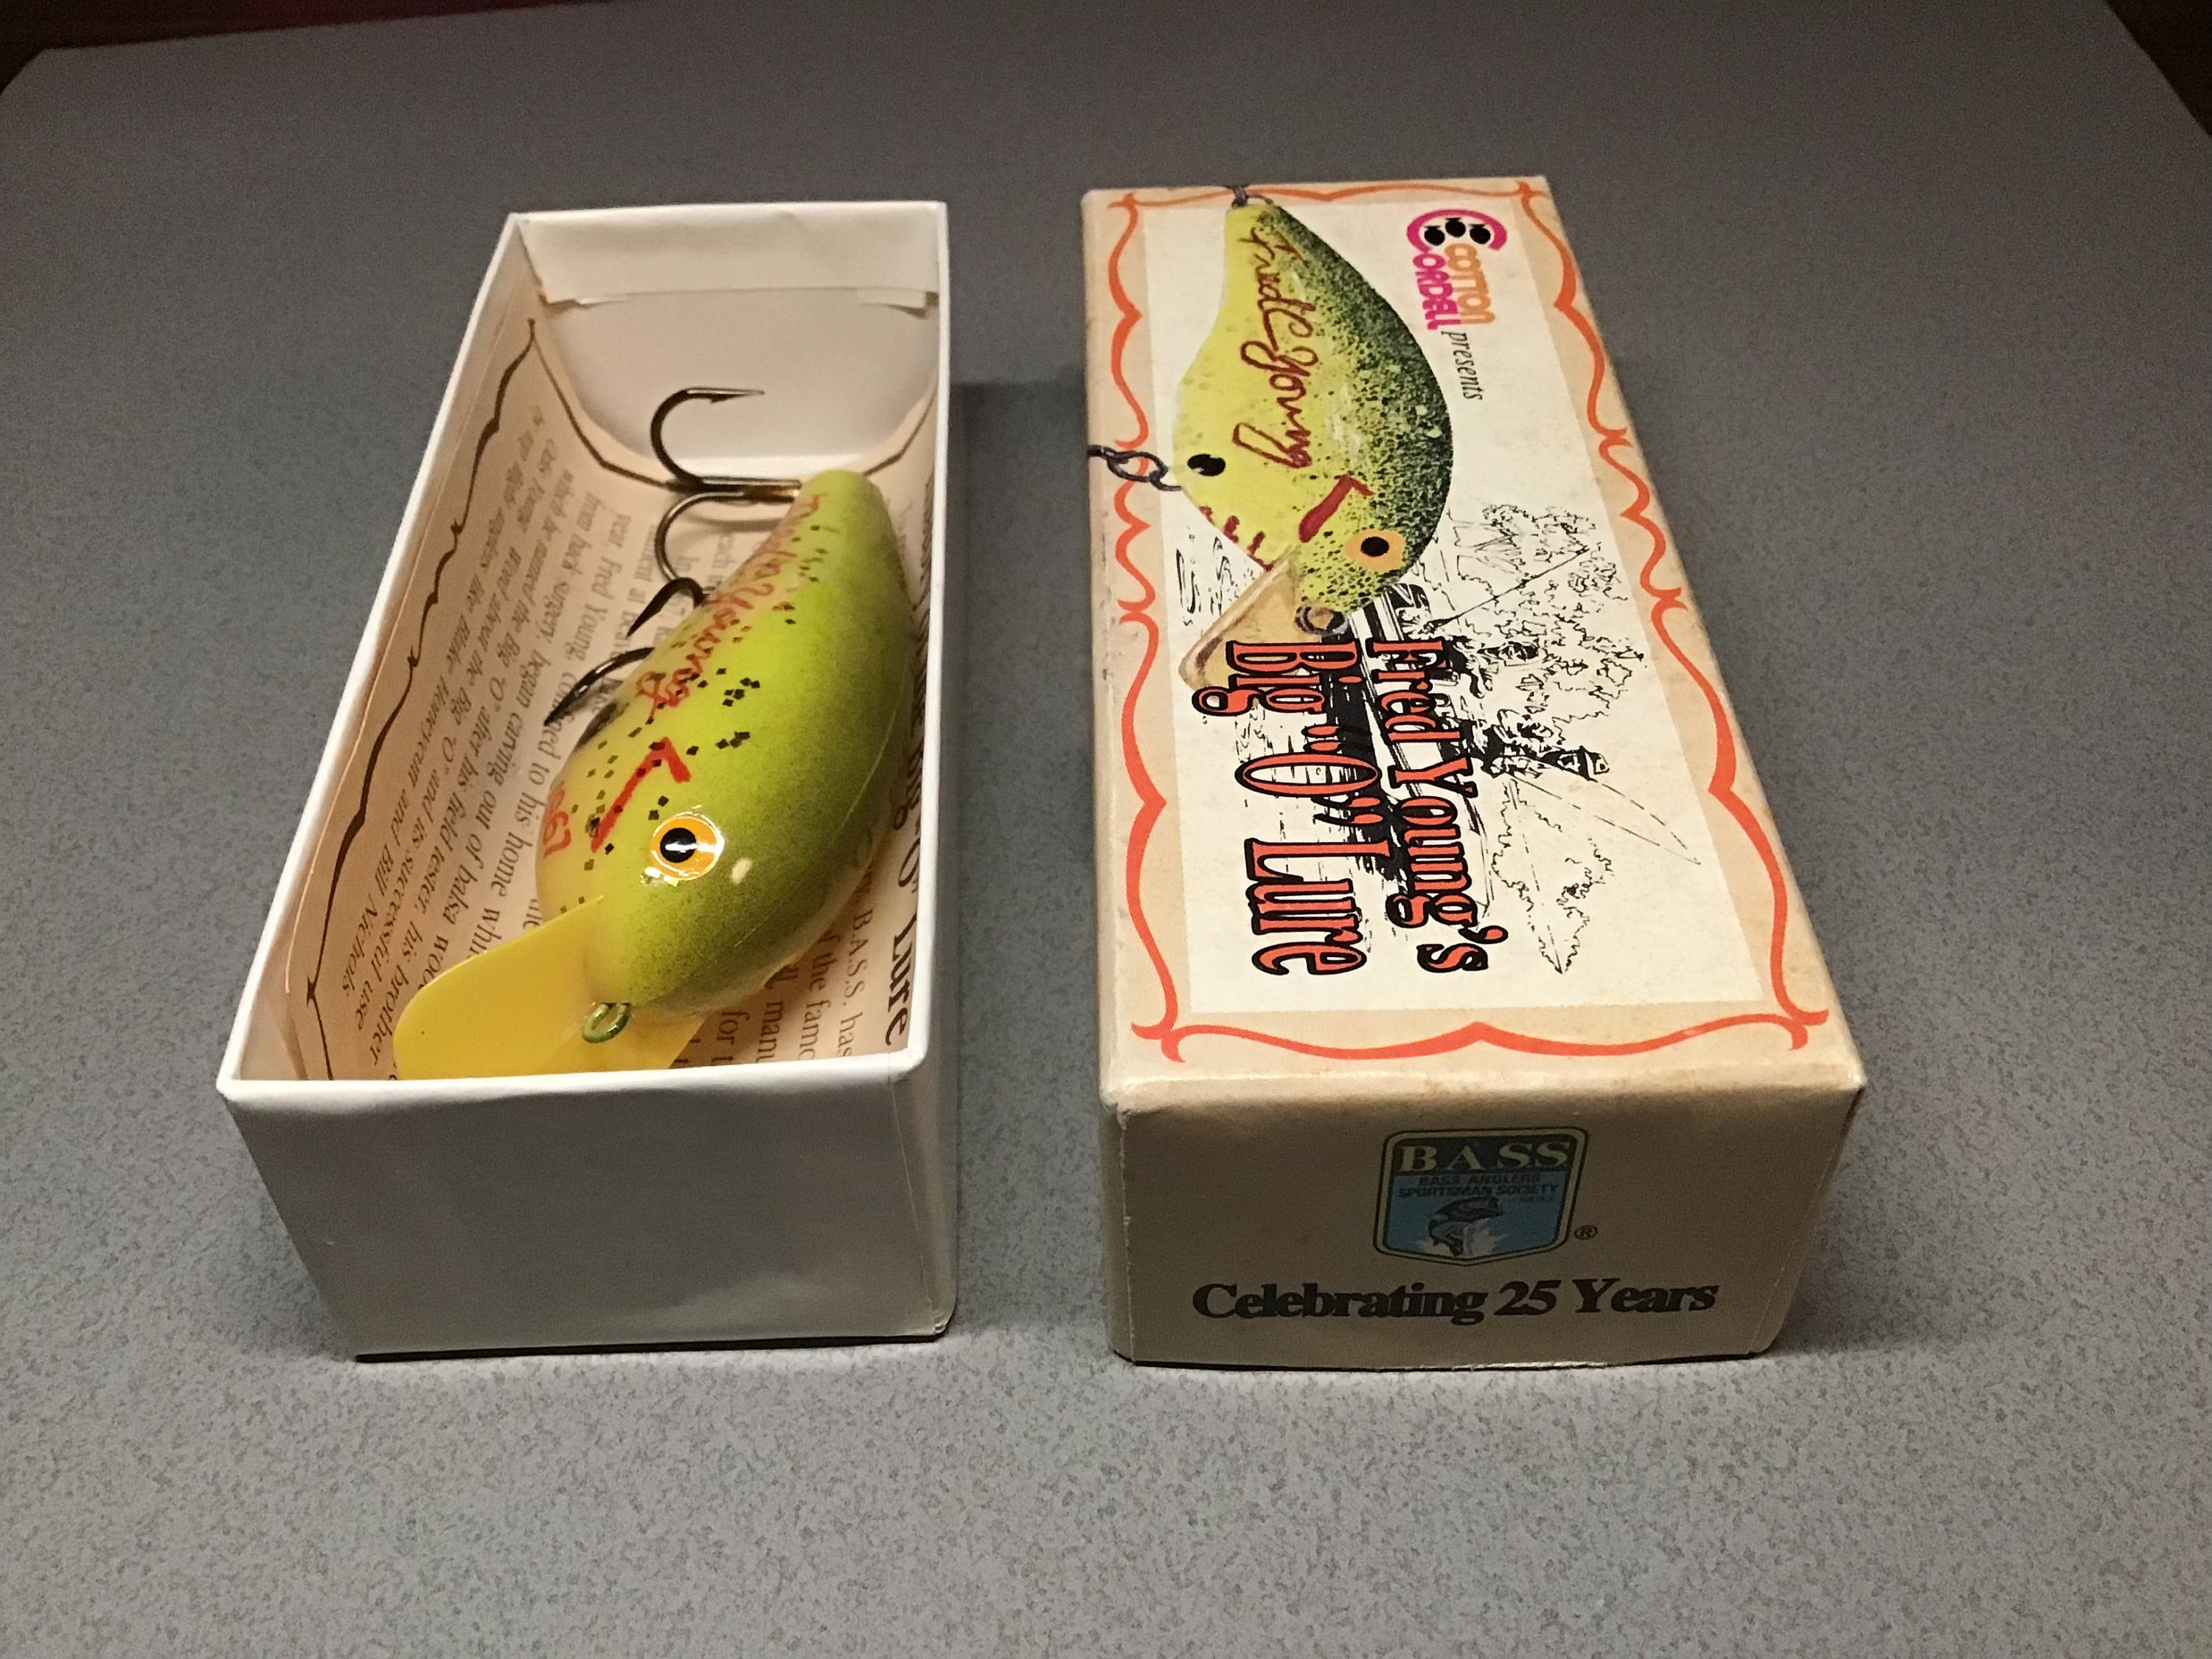 Collectible Cotton Cordell Fishing Lure. Vintage Tackle in Original Box  With Paper. Limited Edition 25 Yr Anniversary. Big O Lure. Mint 